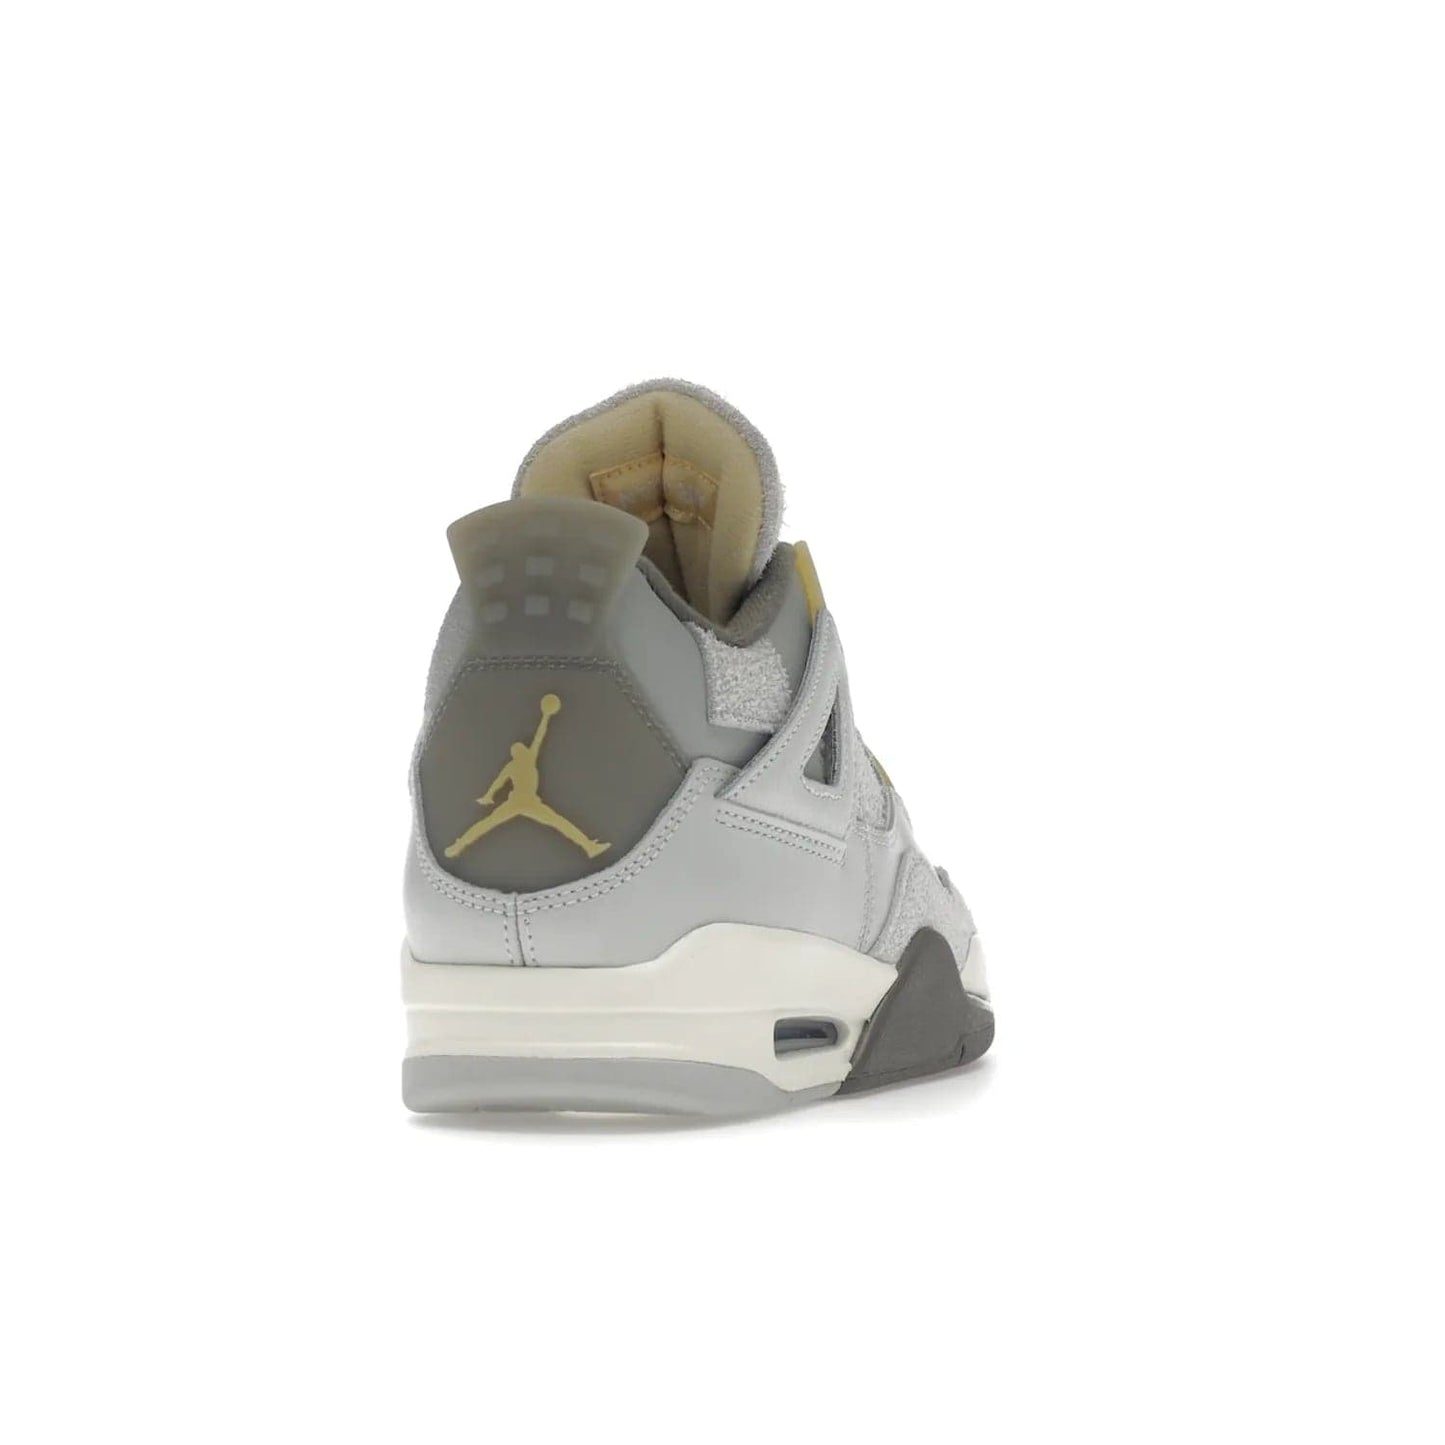 Jordan 4 Retro SE Craft Photon Dust - Image 30 - Only at www.BallersClubKickz.com - Upgrade your shoe collection with the Air Jordan 4 Retro SE Craft Photon Dust. This luxurious sneaker features a combination of suede and leather with unique grey tones like Photon Dust, Pale Vanilla, Off White, Grey Fog, Flat Pewter, and Sail. Available February 11, 2023.